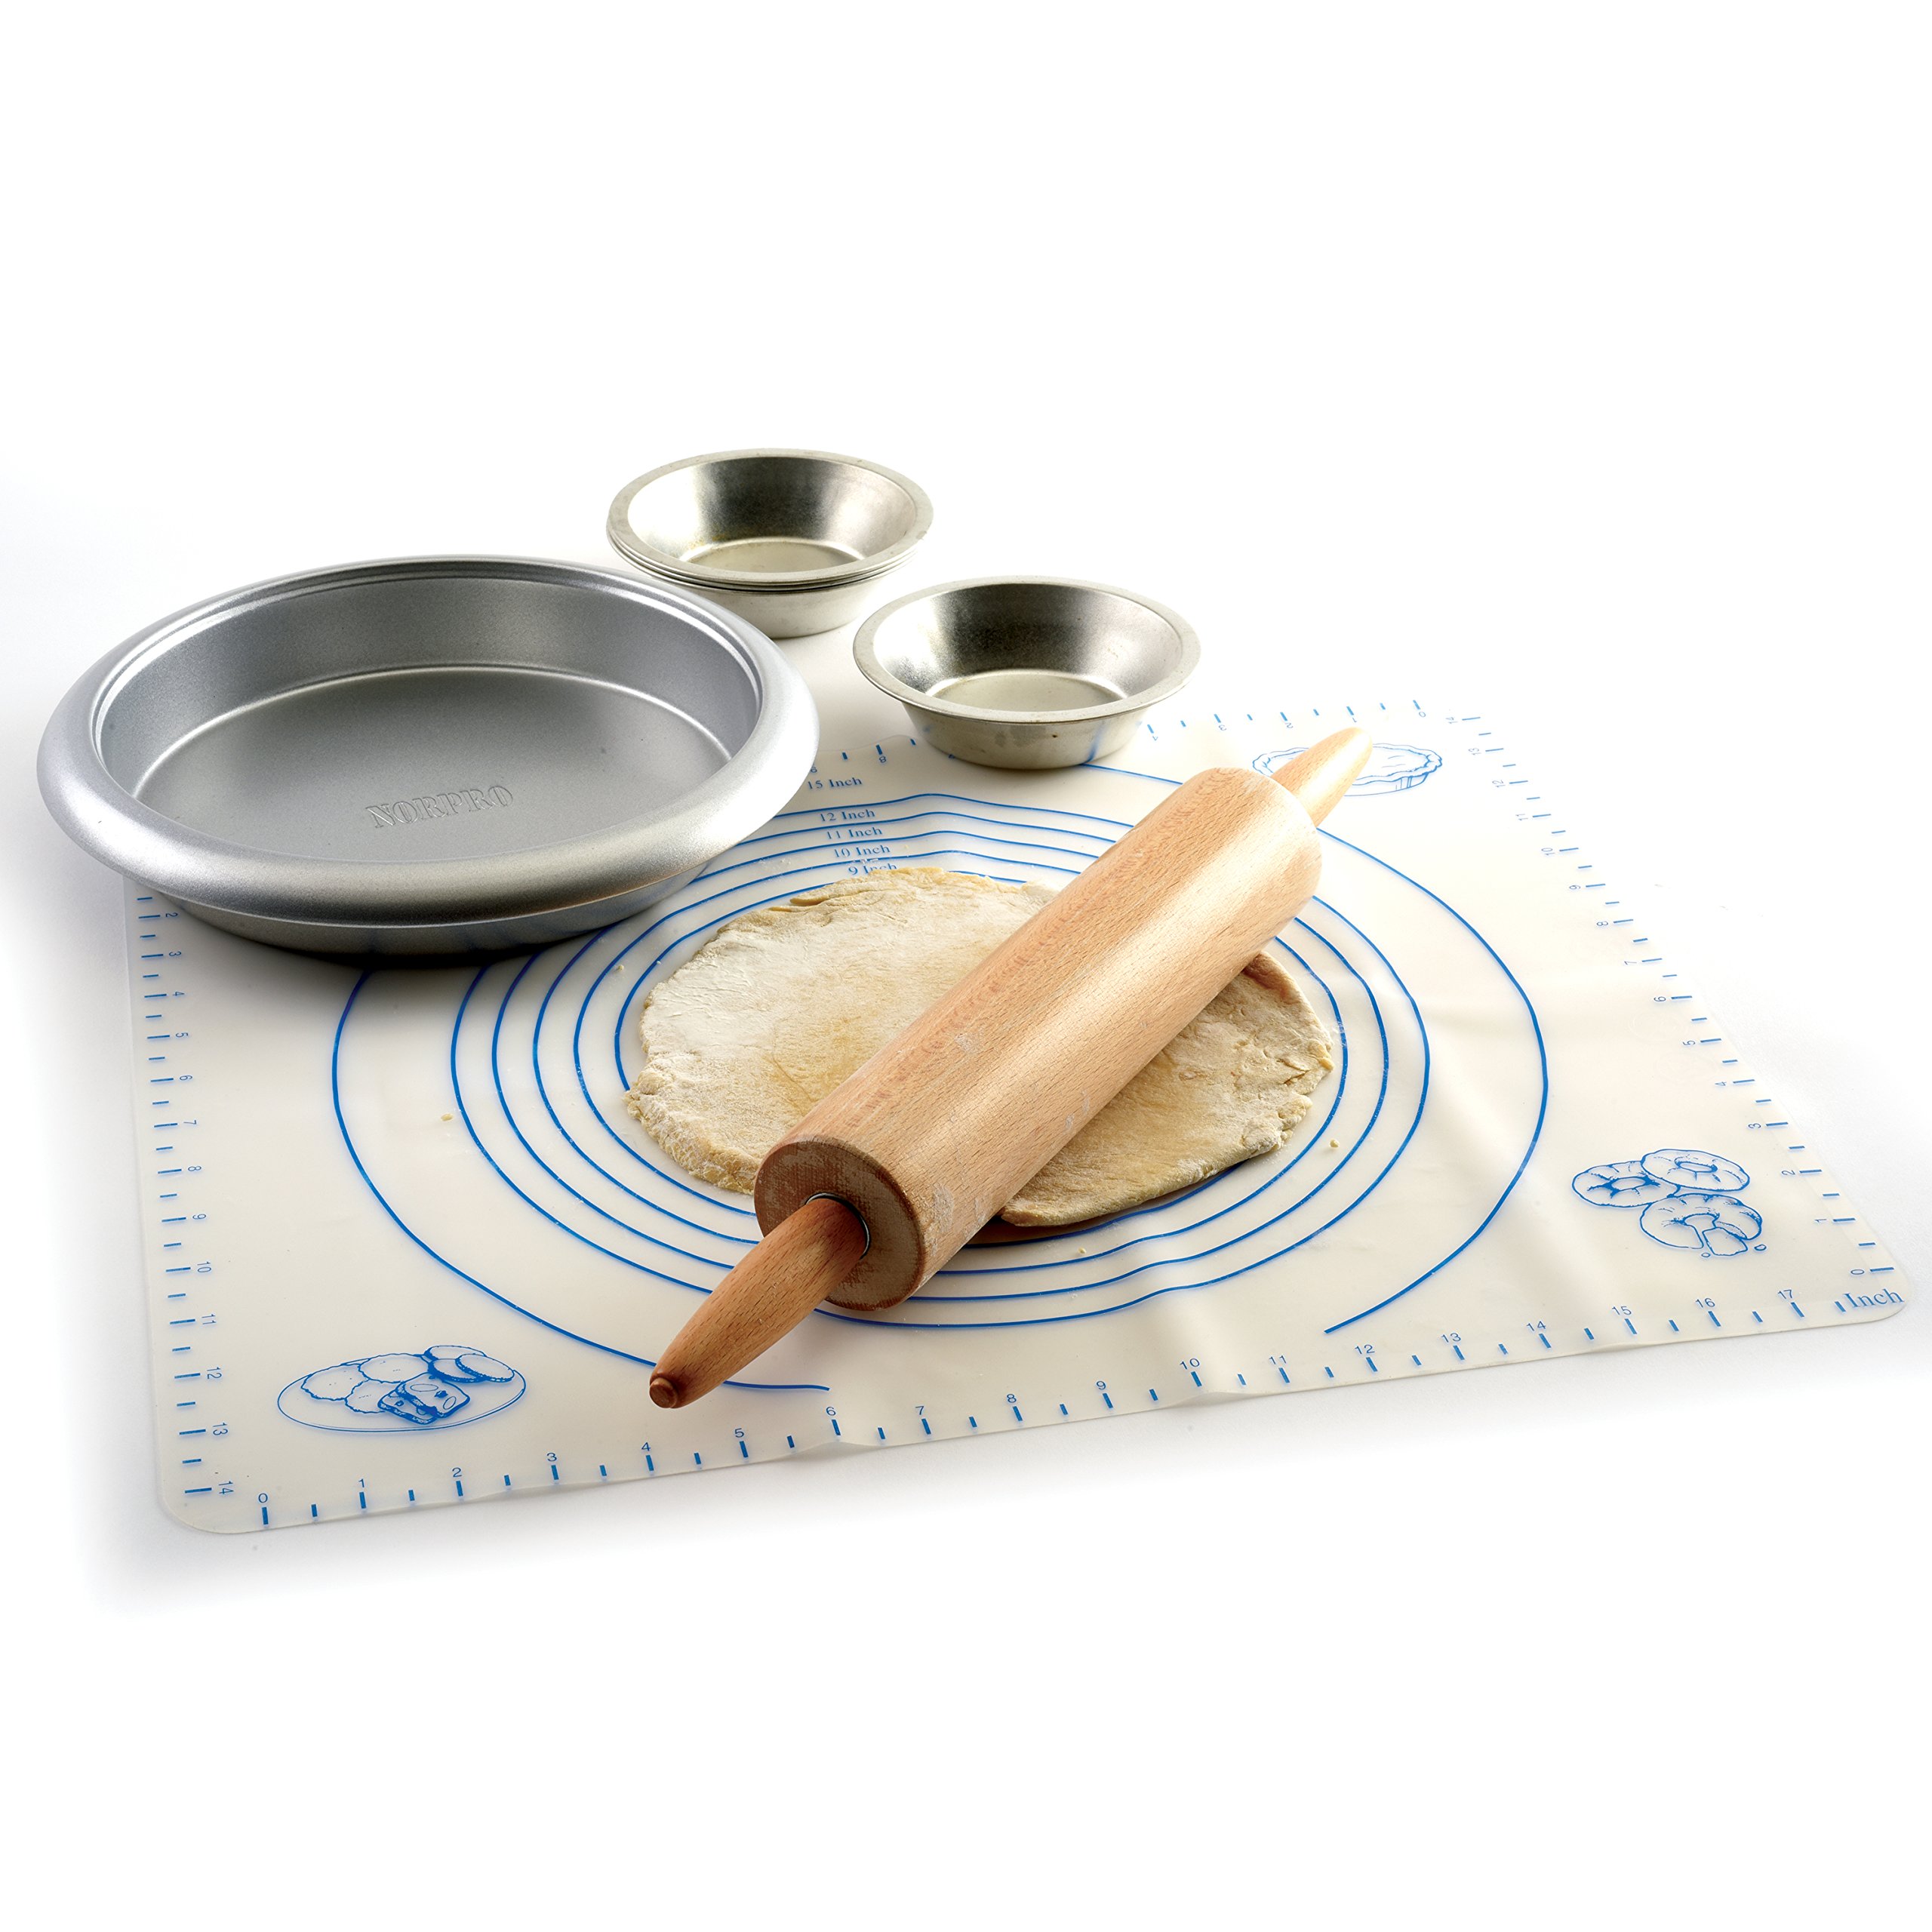 Norpro Silicone Pastry Mat with Measures, As Shown